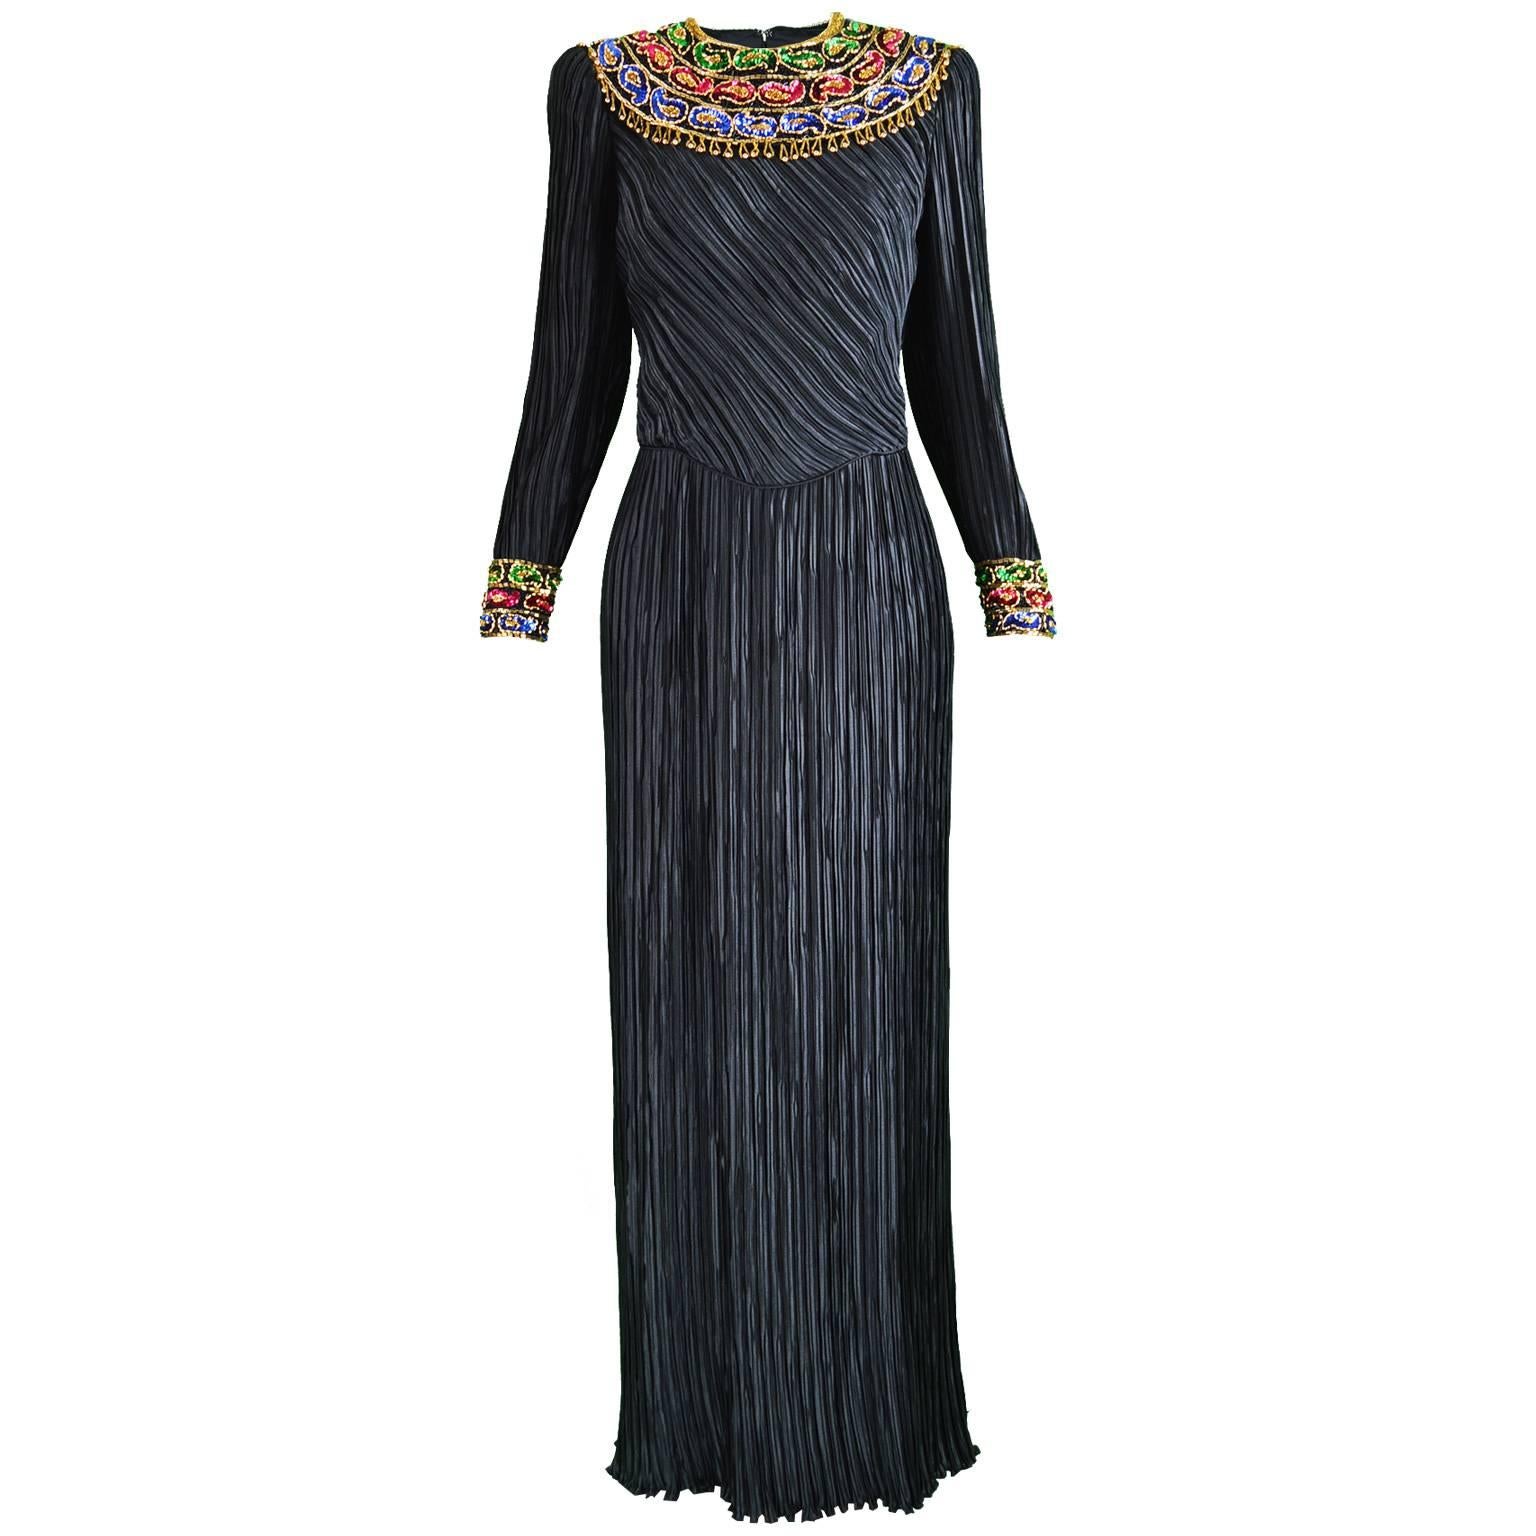 George F Couture Black & Gold Fortuny Pleat Beaded Evening Gown, 1980s